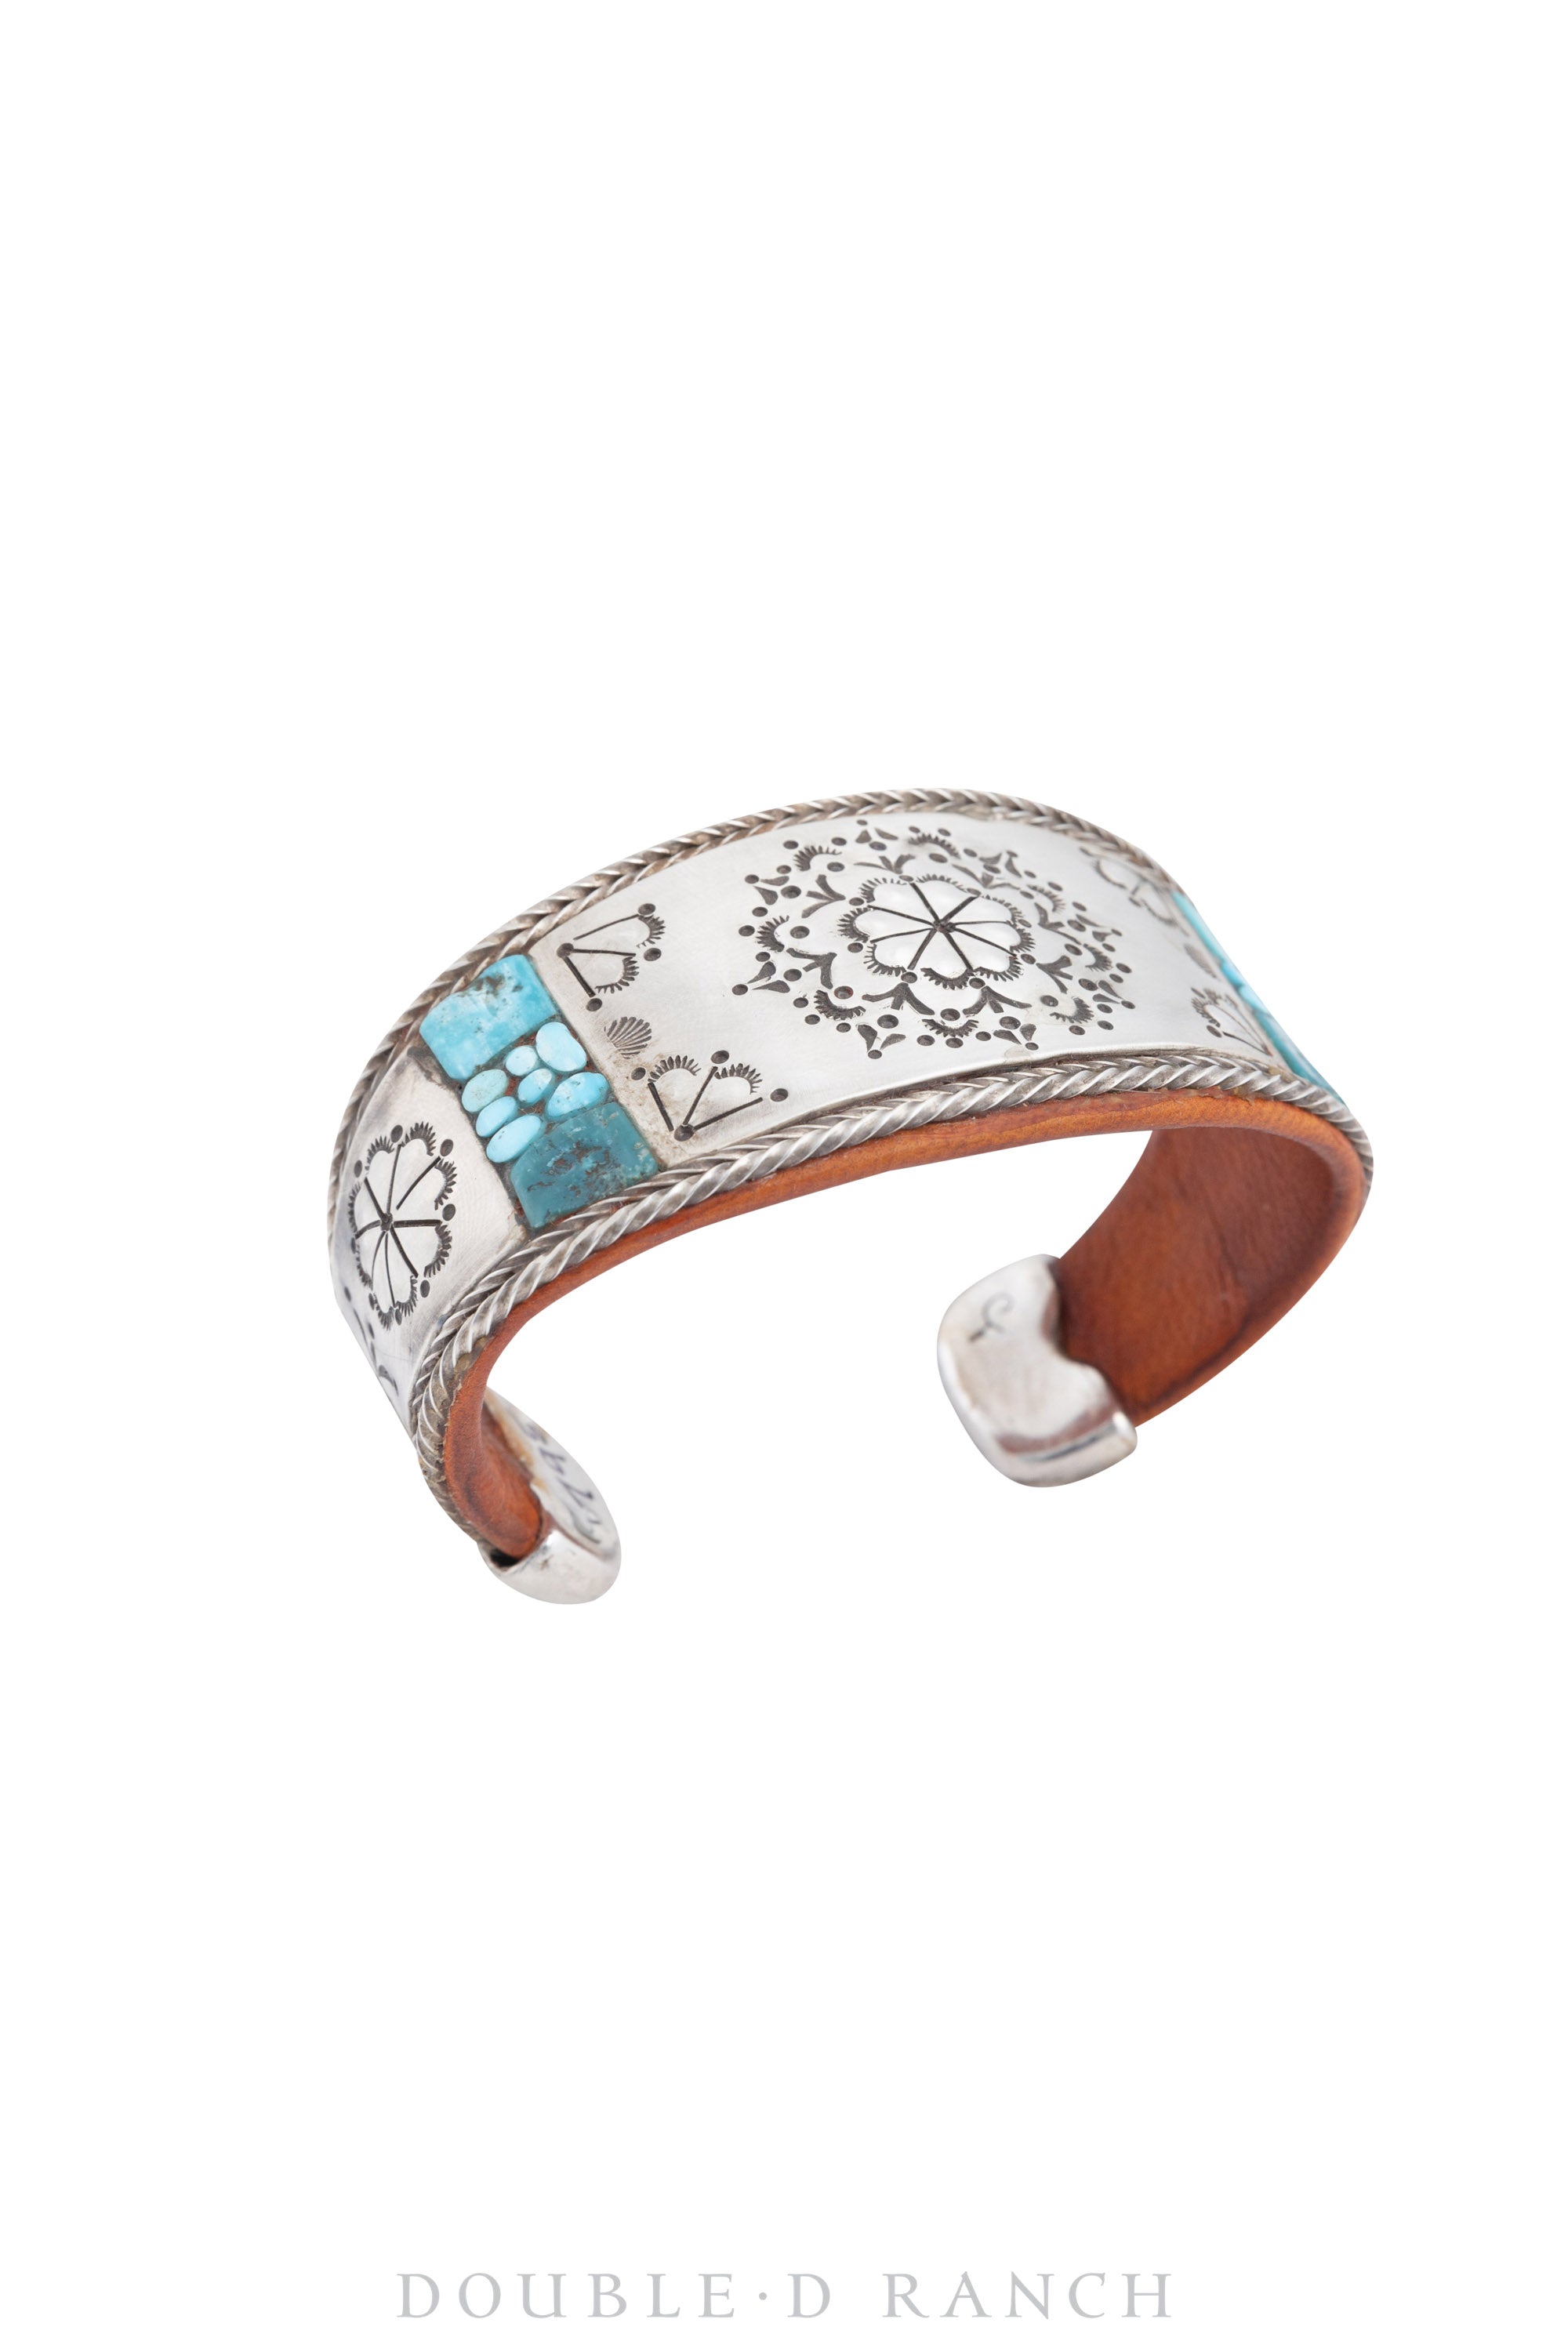 Cuff, Inlay, Turquoise, Leather Lined, Artisan, Charlie Favour, Contemporary, 3596